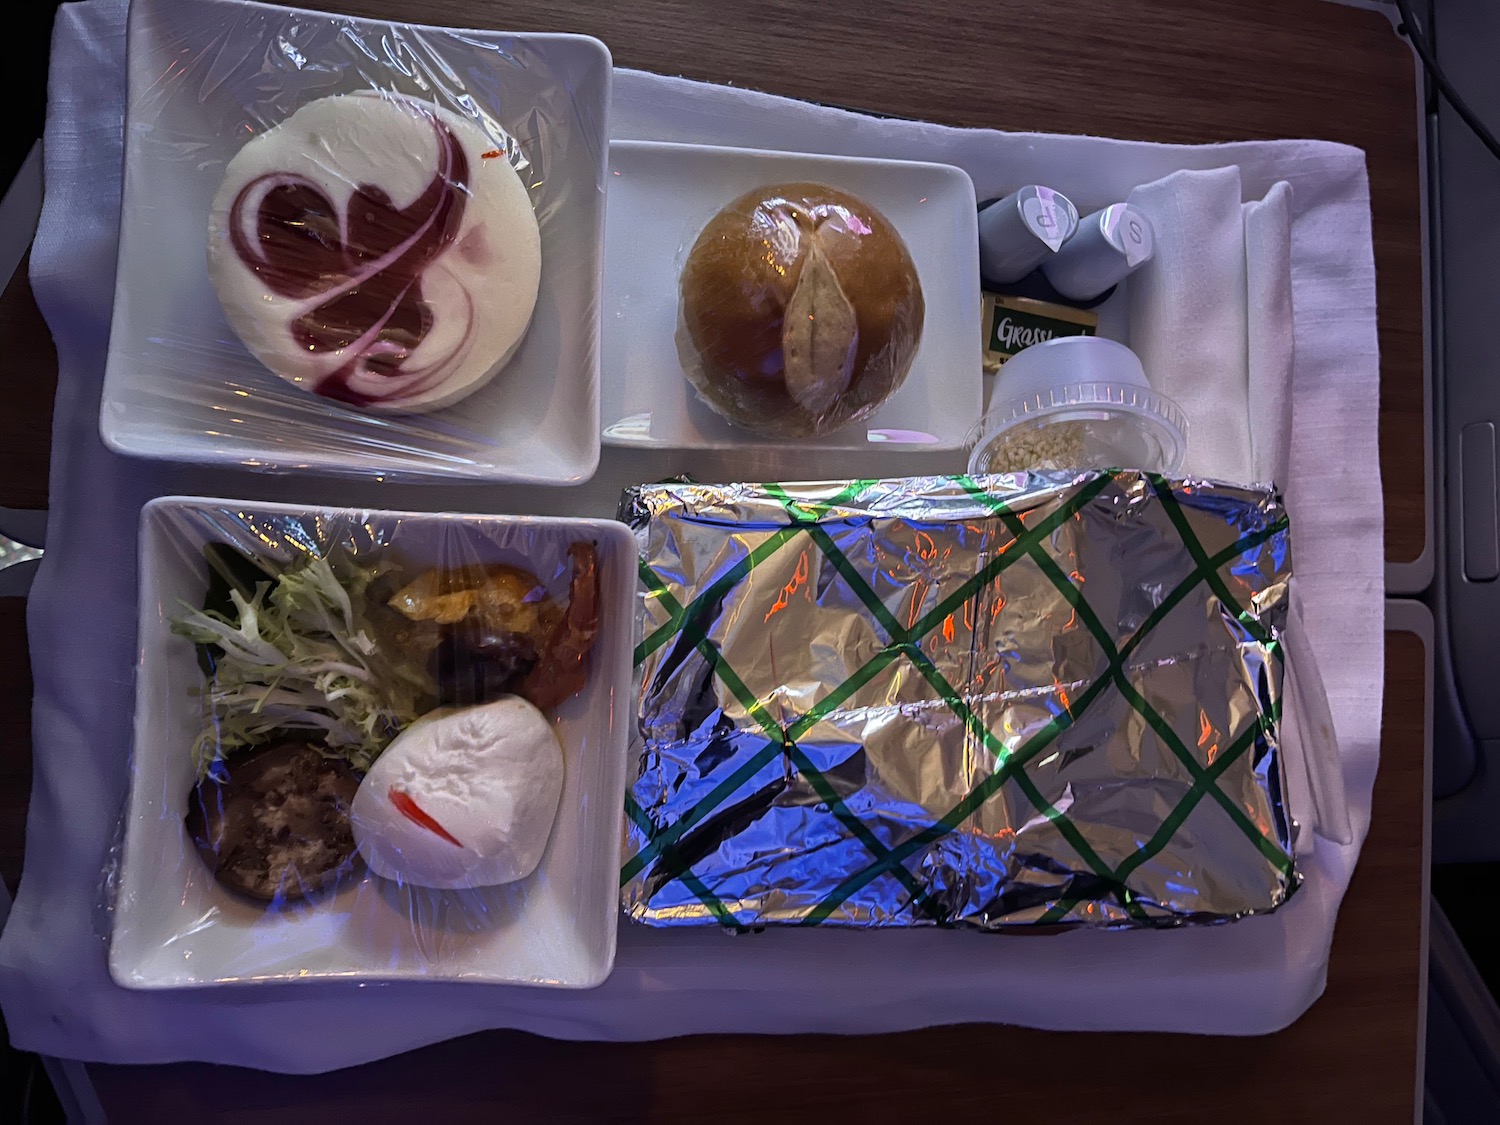 food in a tray on a table